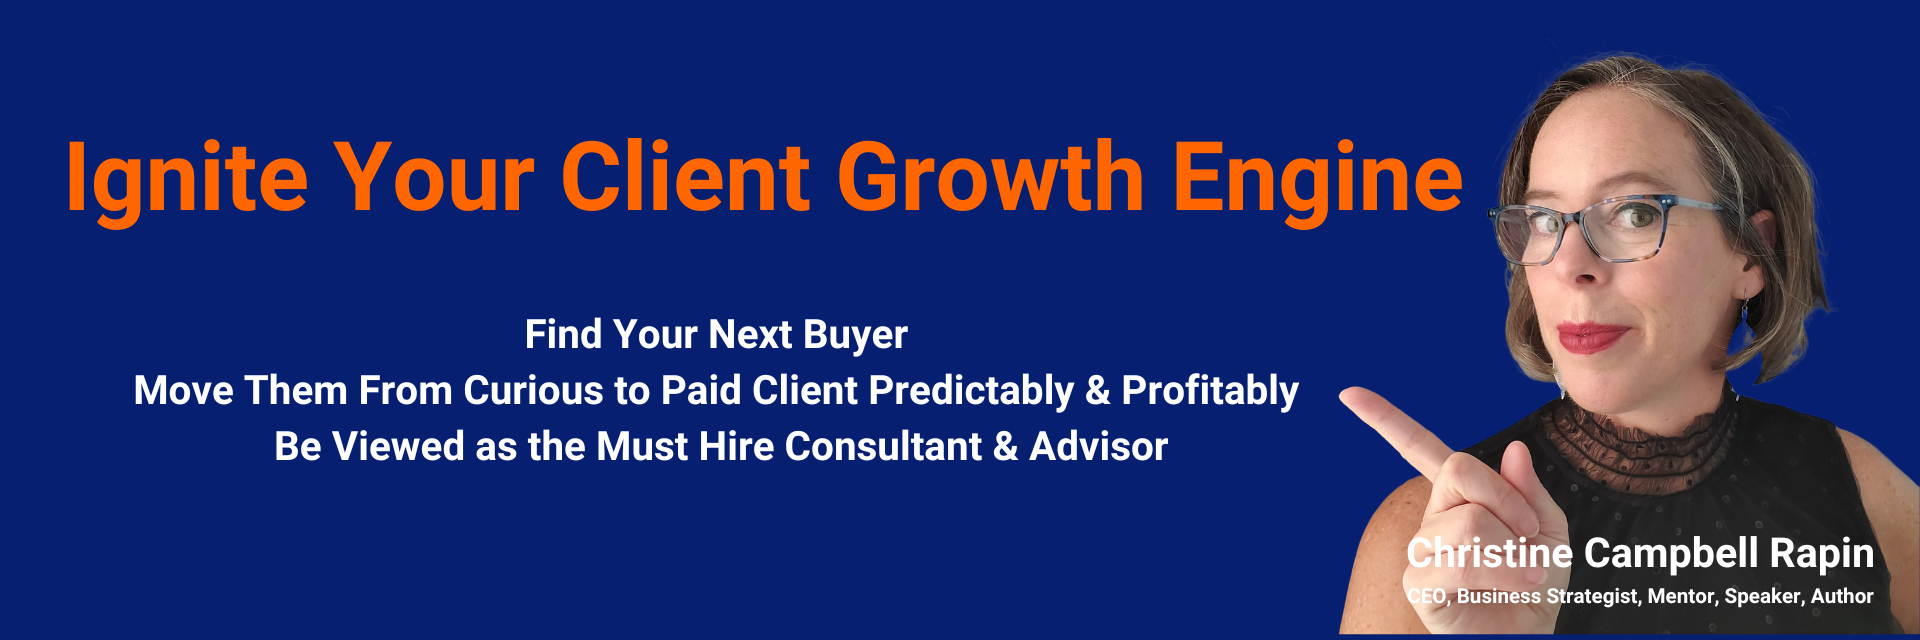 Ignite Your Client Growth Engine with Christine Campbell Rapin & CLEAR Acceleration Inc. Find Your Next Buyer Move Them From Curious to Paid Client Predictably & Profitably Be Viewed as the Must Hire Consultant & Advisor